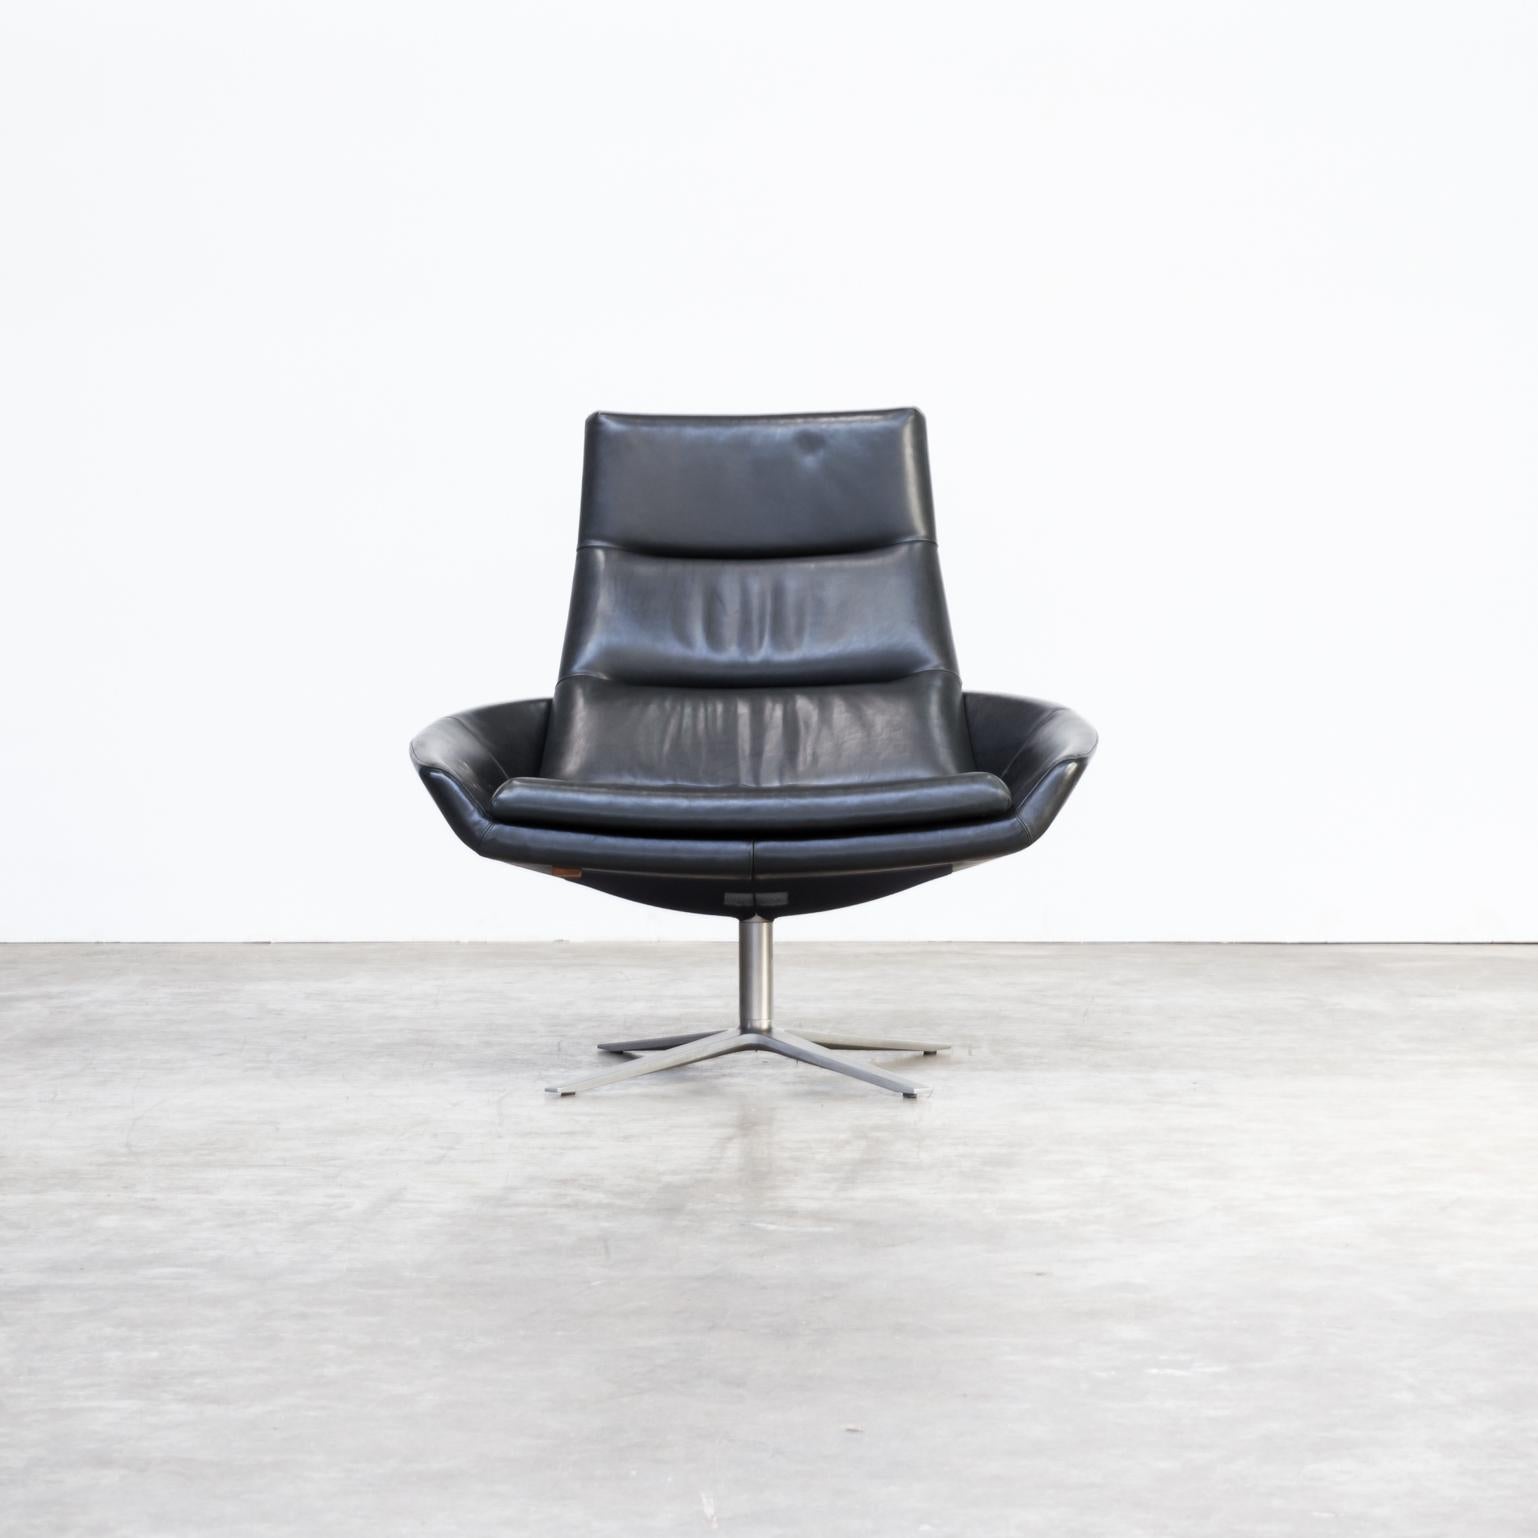 Montis ‘hugo’ lounge relax fauteuil black leatherette. Good condition consistent with age and use.